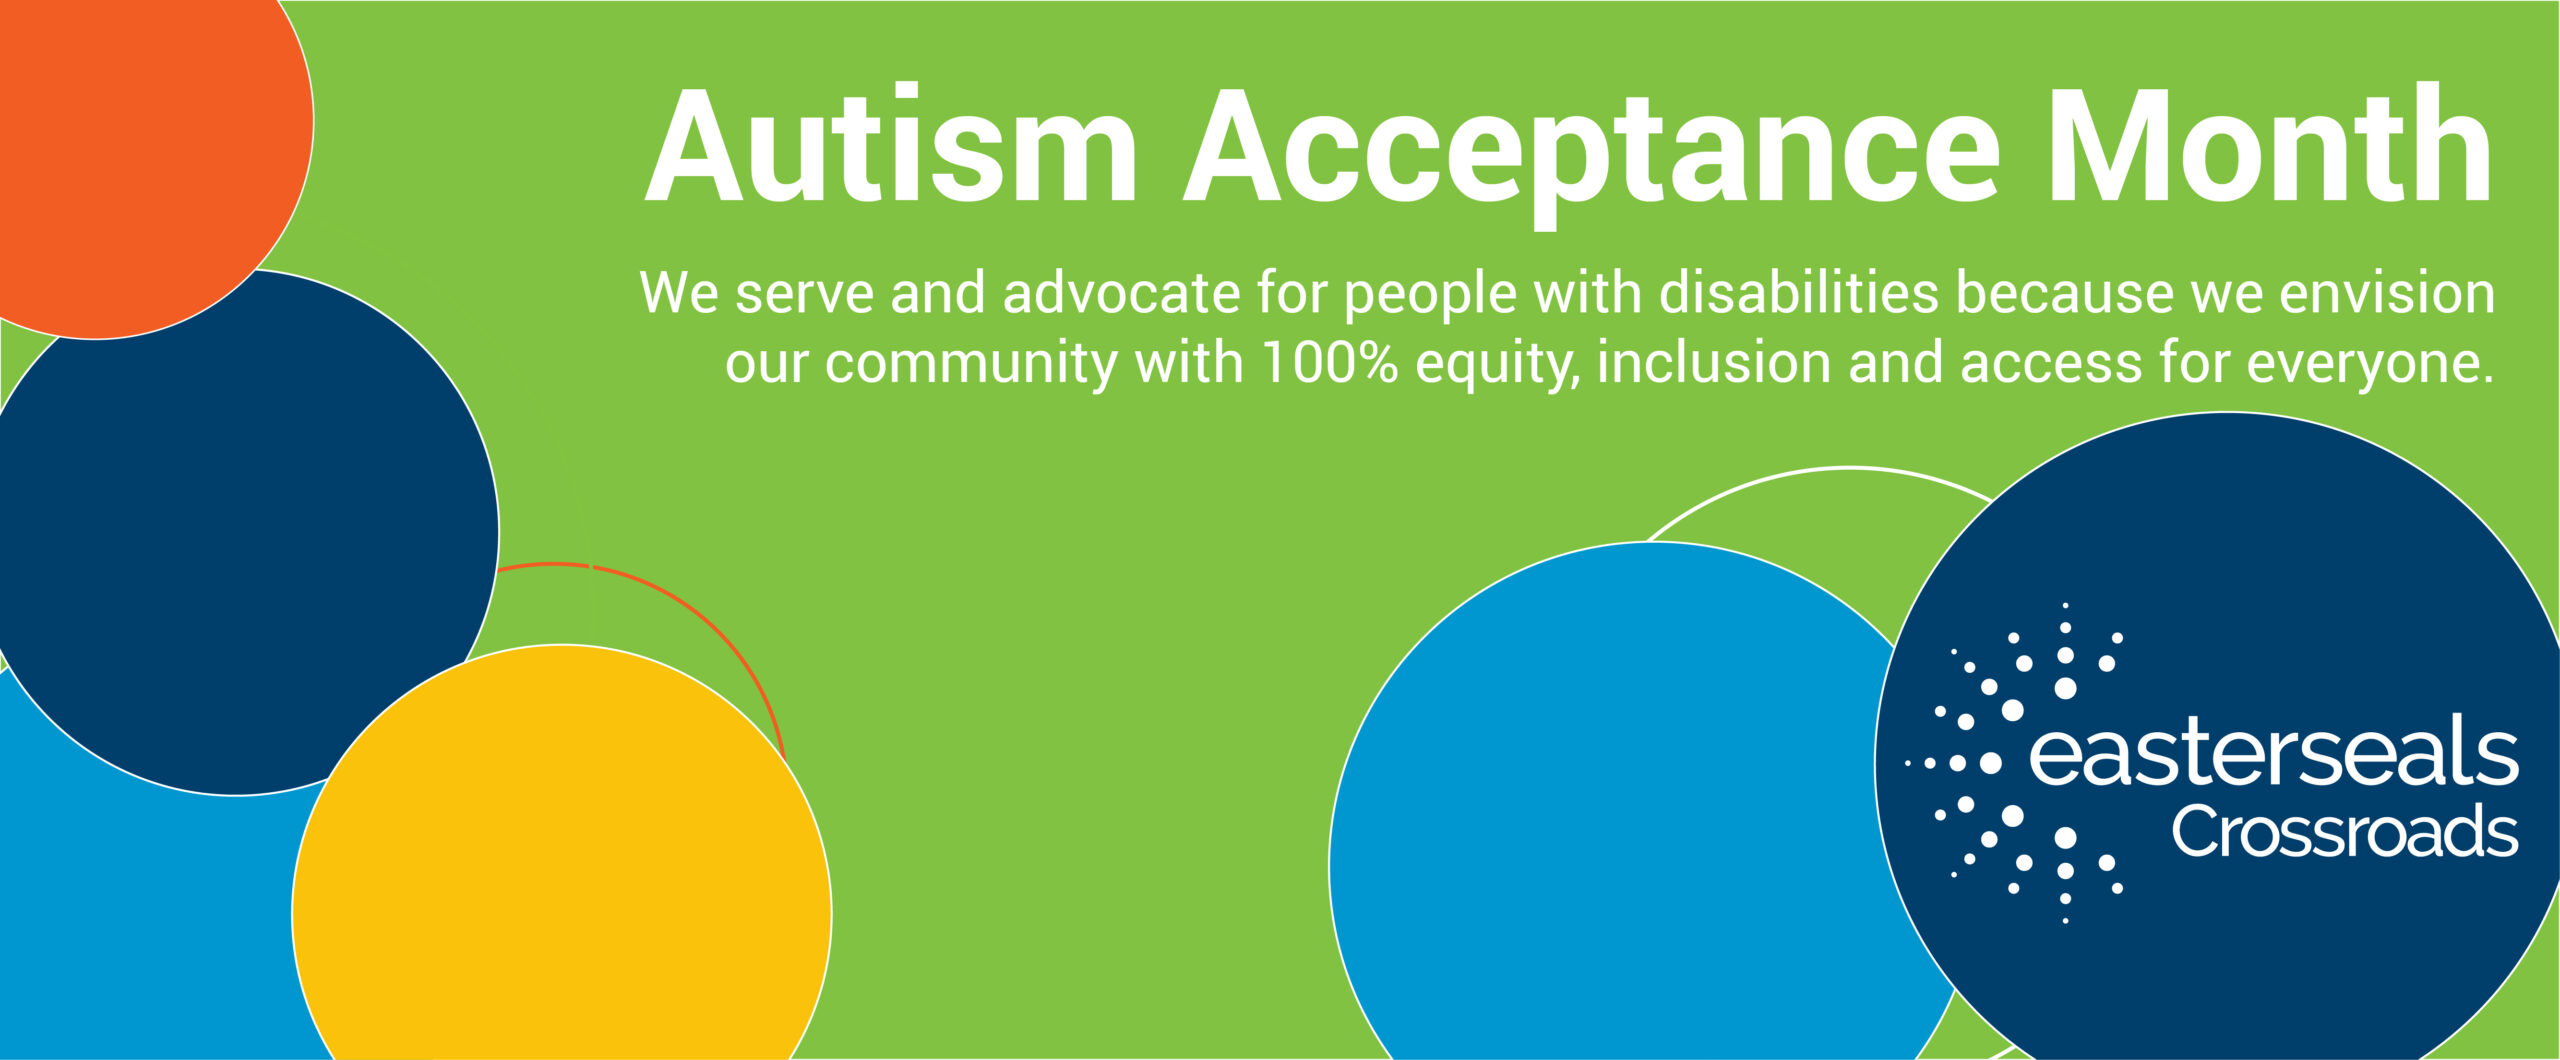 Autism Acceptance Month Slider with those words and our mission and colorful circles